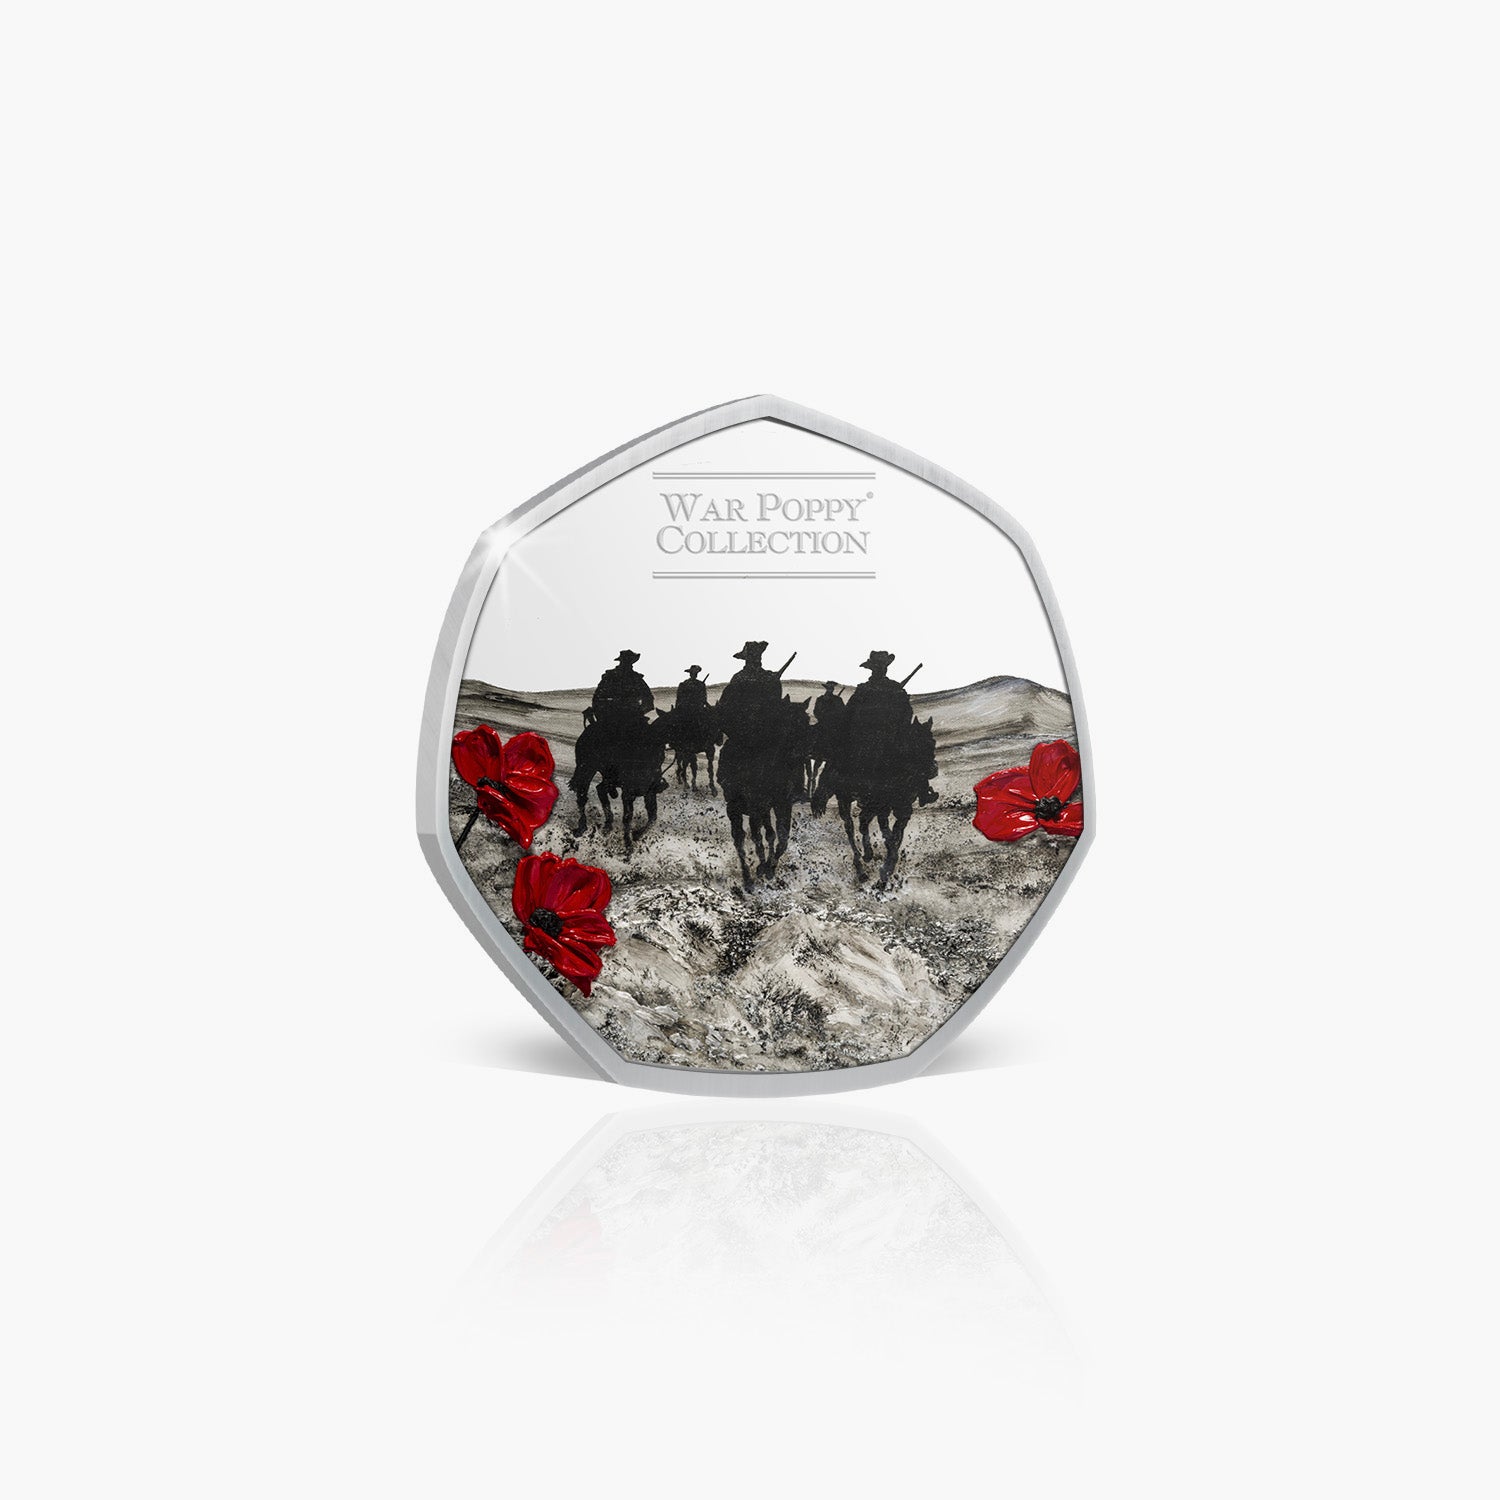 For The Light Horse And Walers Silver Plated Coin